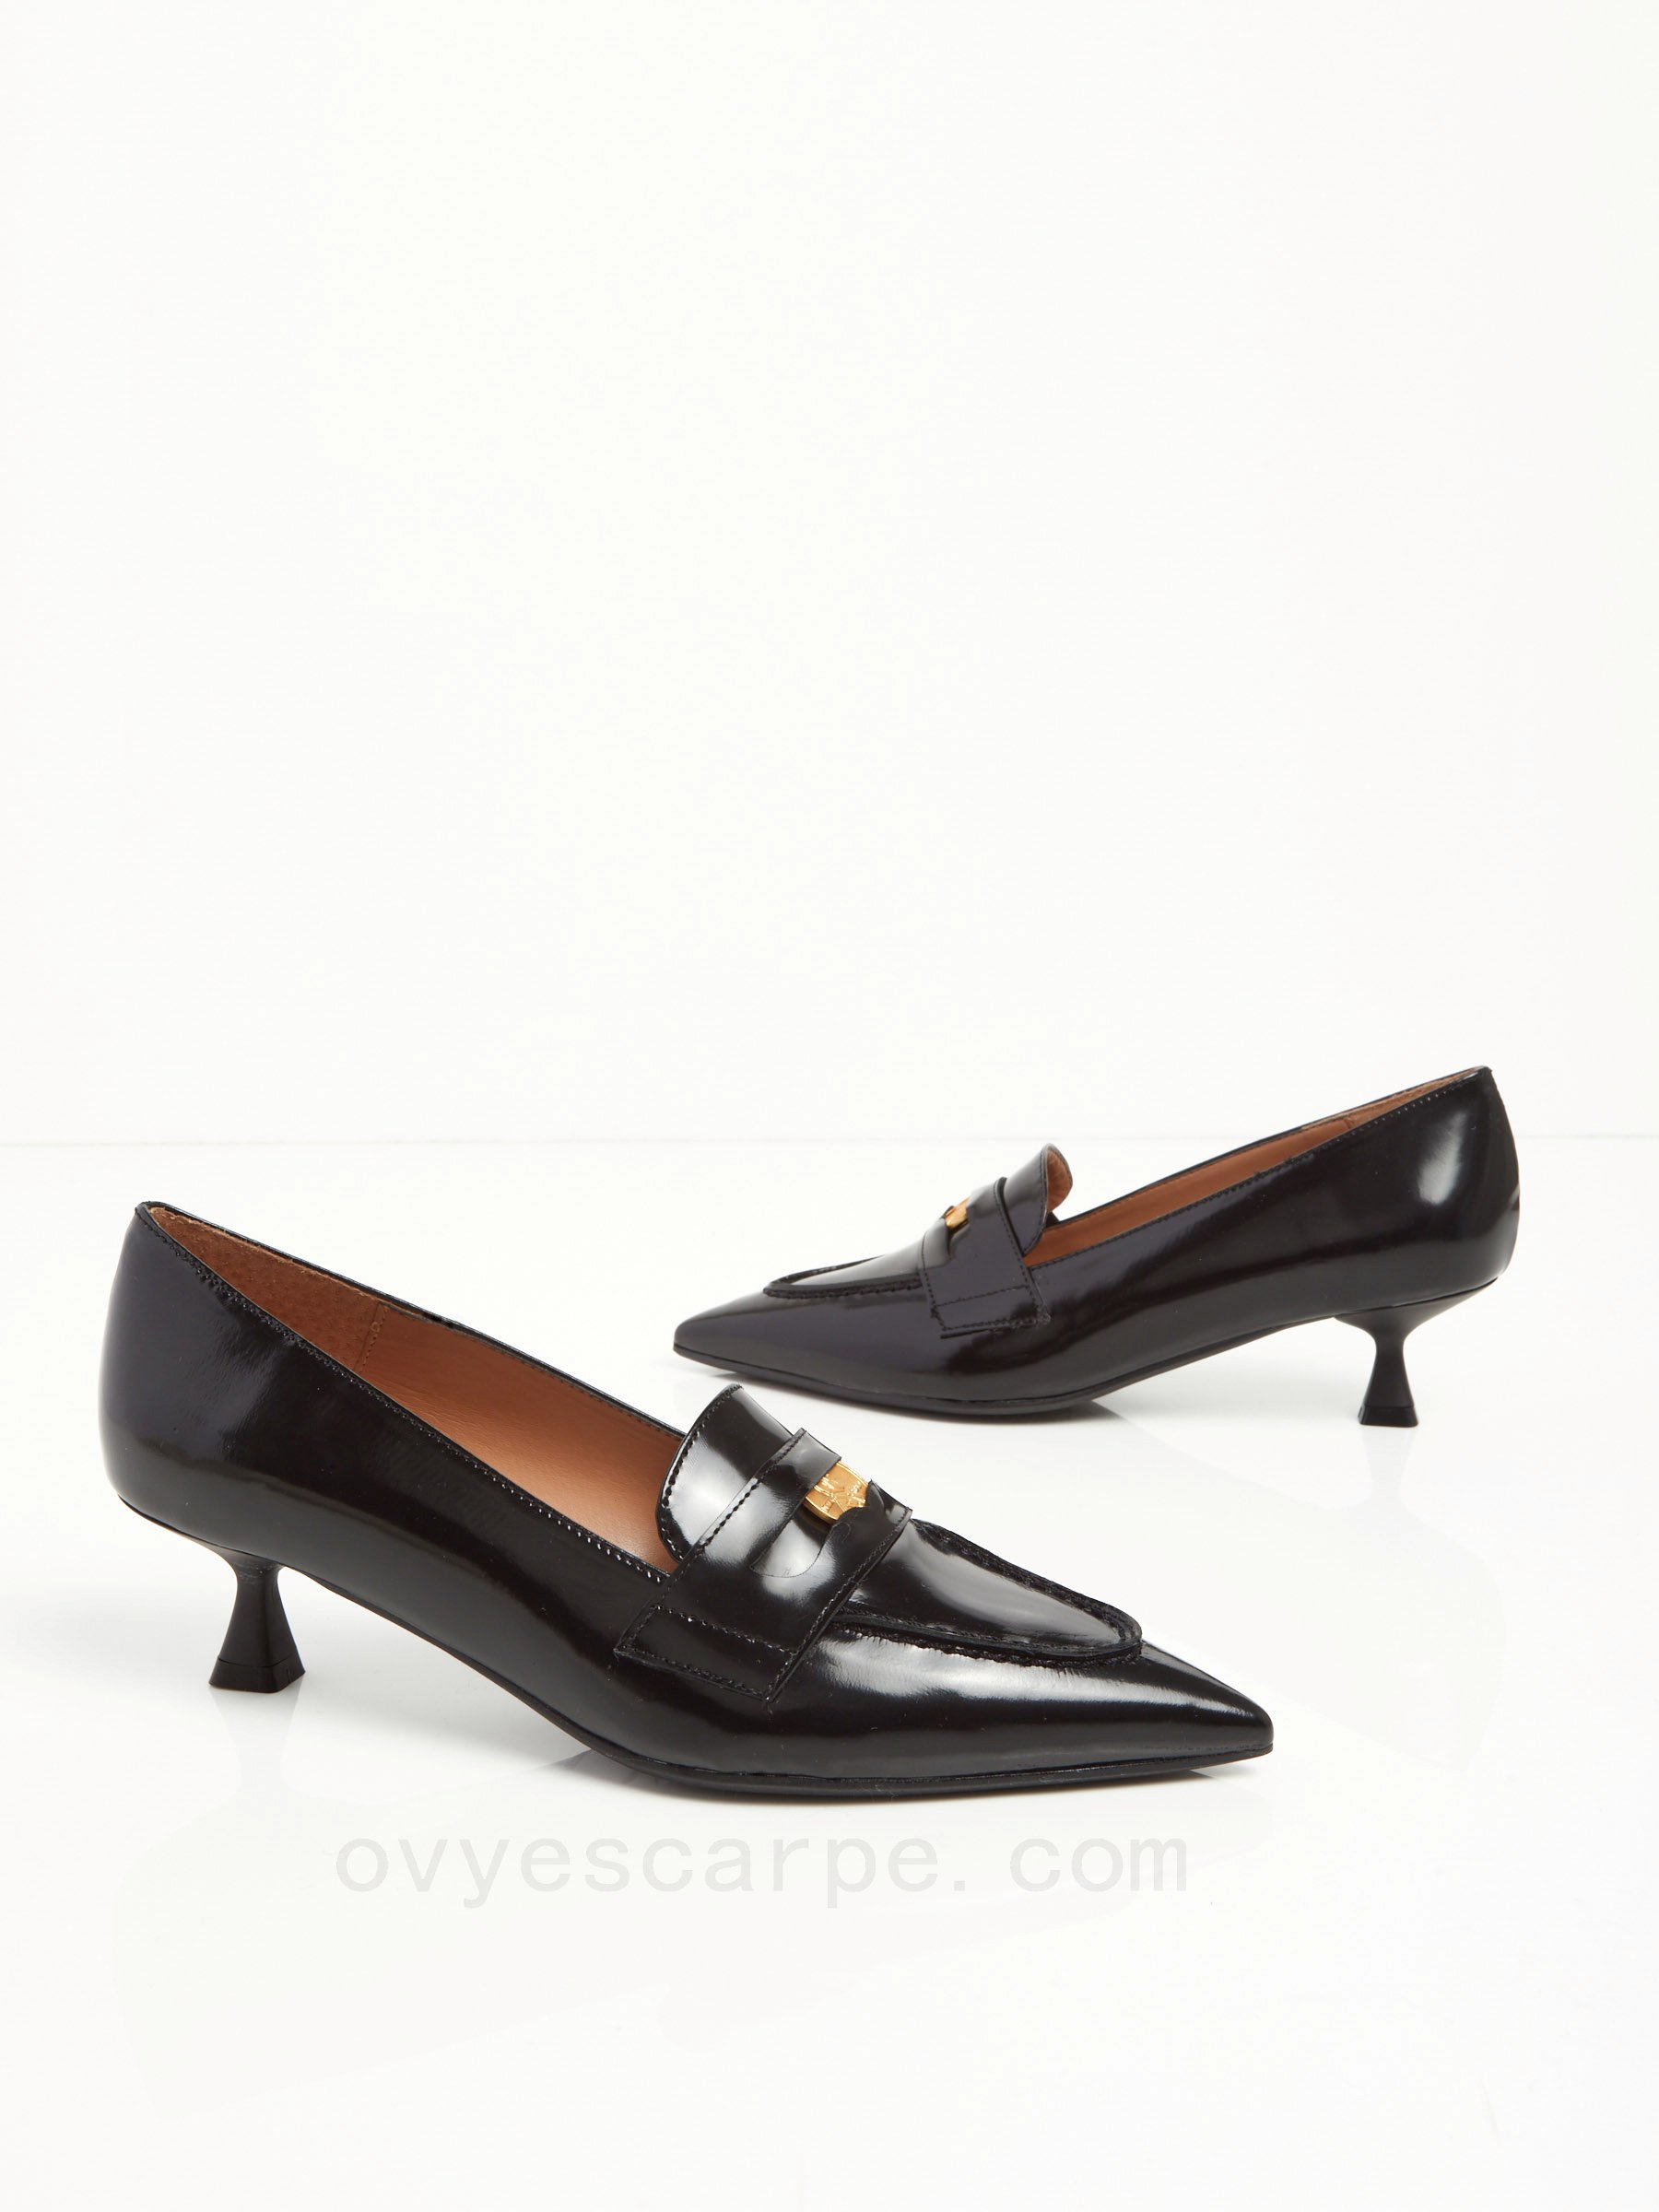 Black Friday Leather Pumps F08161027-0400